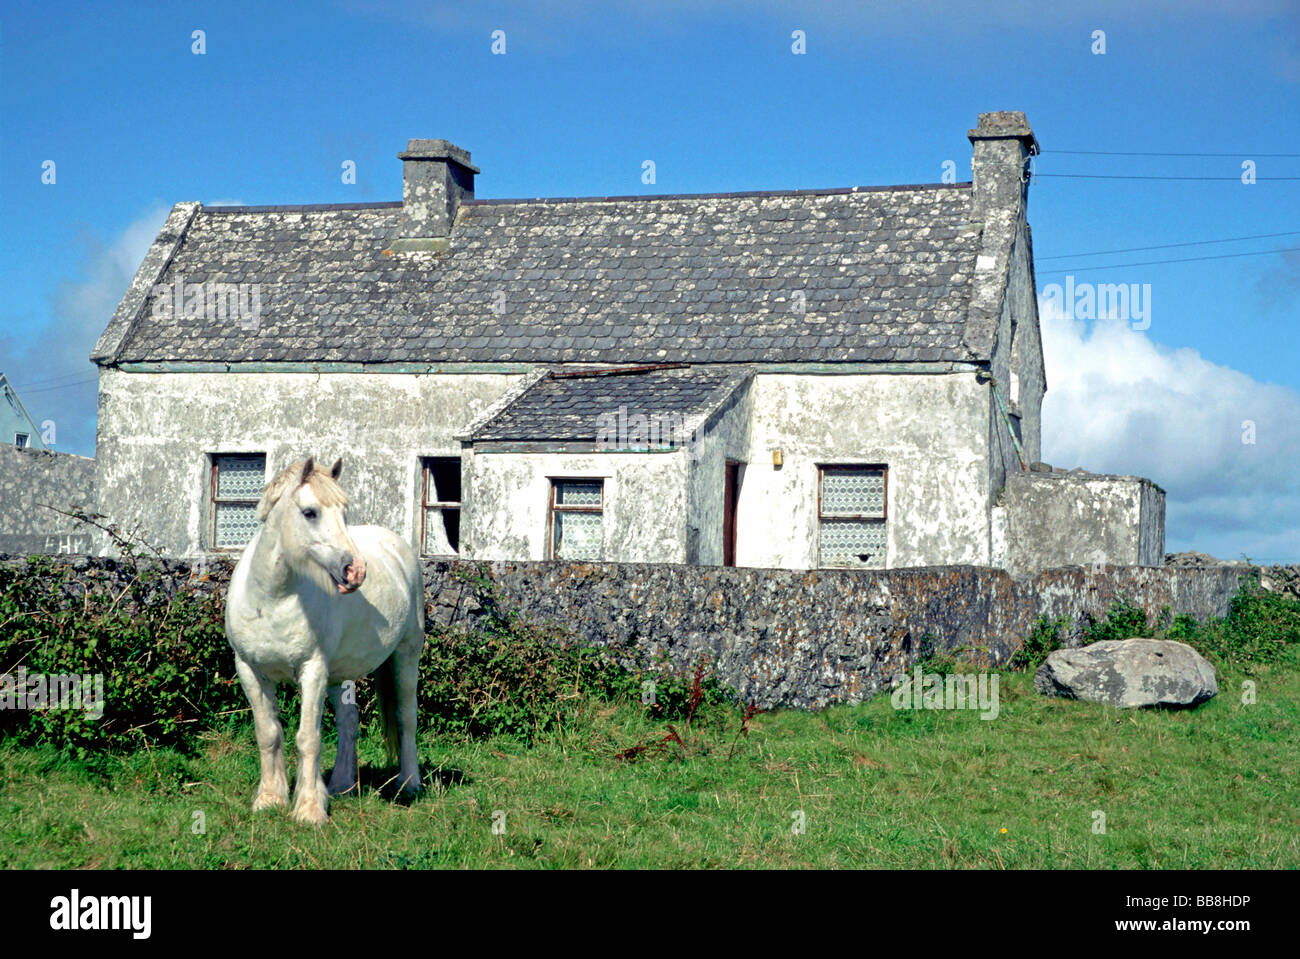 A gray horse in front of a gray stone cottage, Inishmore, Aran Islands, Ireland Stock Photo